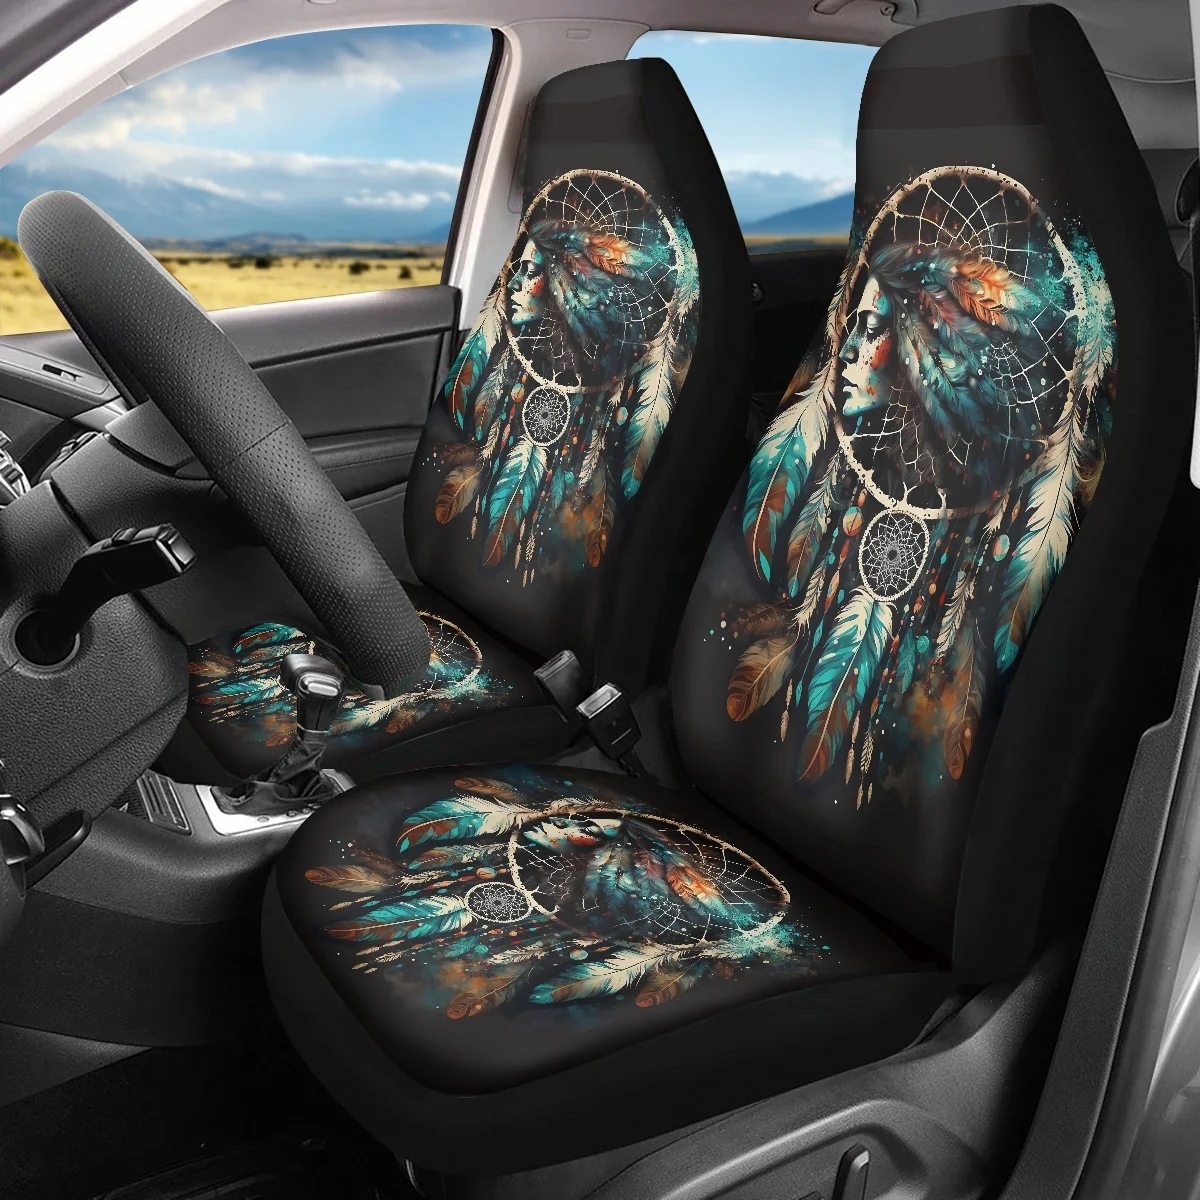 INSTANTARTS Aztec Ethnic Indian Dreamcatcher Print Car Seat Covers Set of 2 Anti-Slip Vehicle Seat Cushion Auto Seat Protector